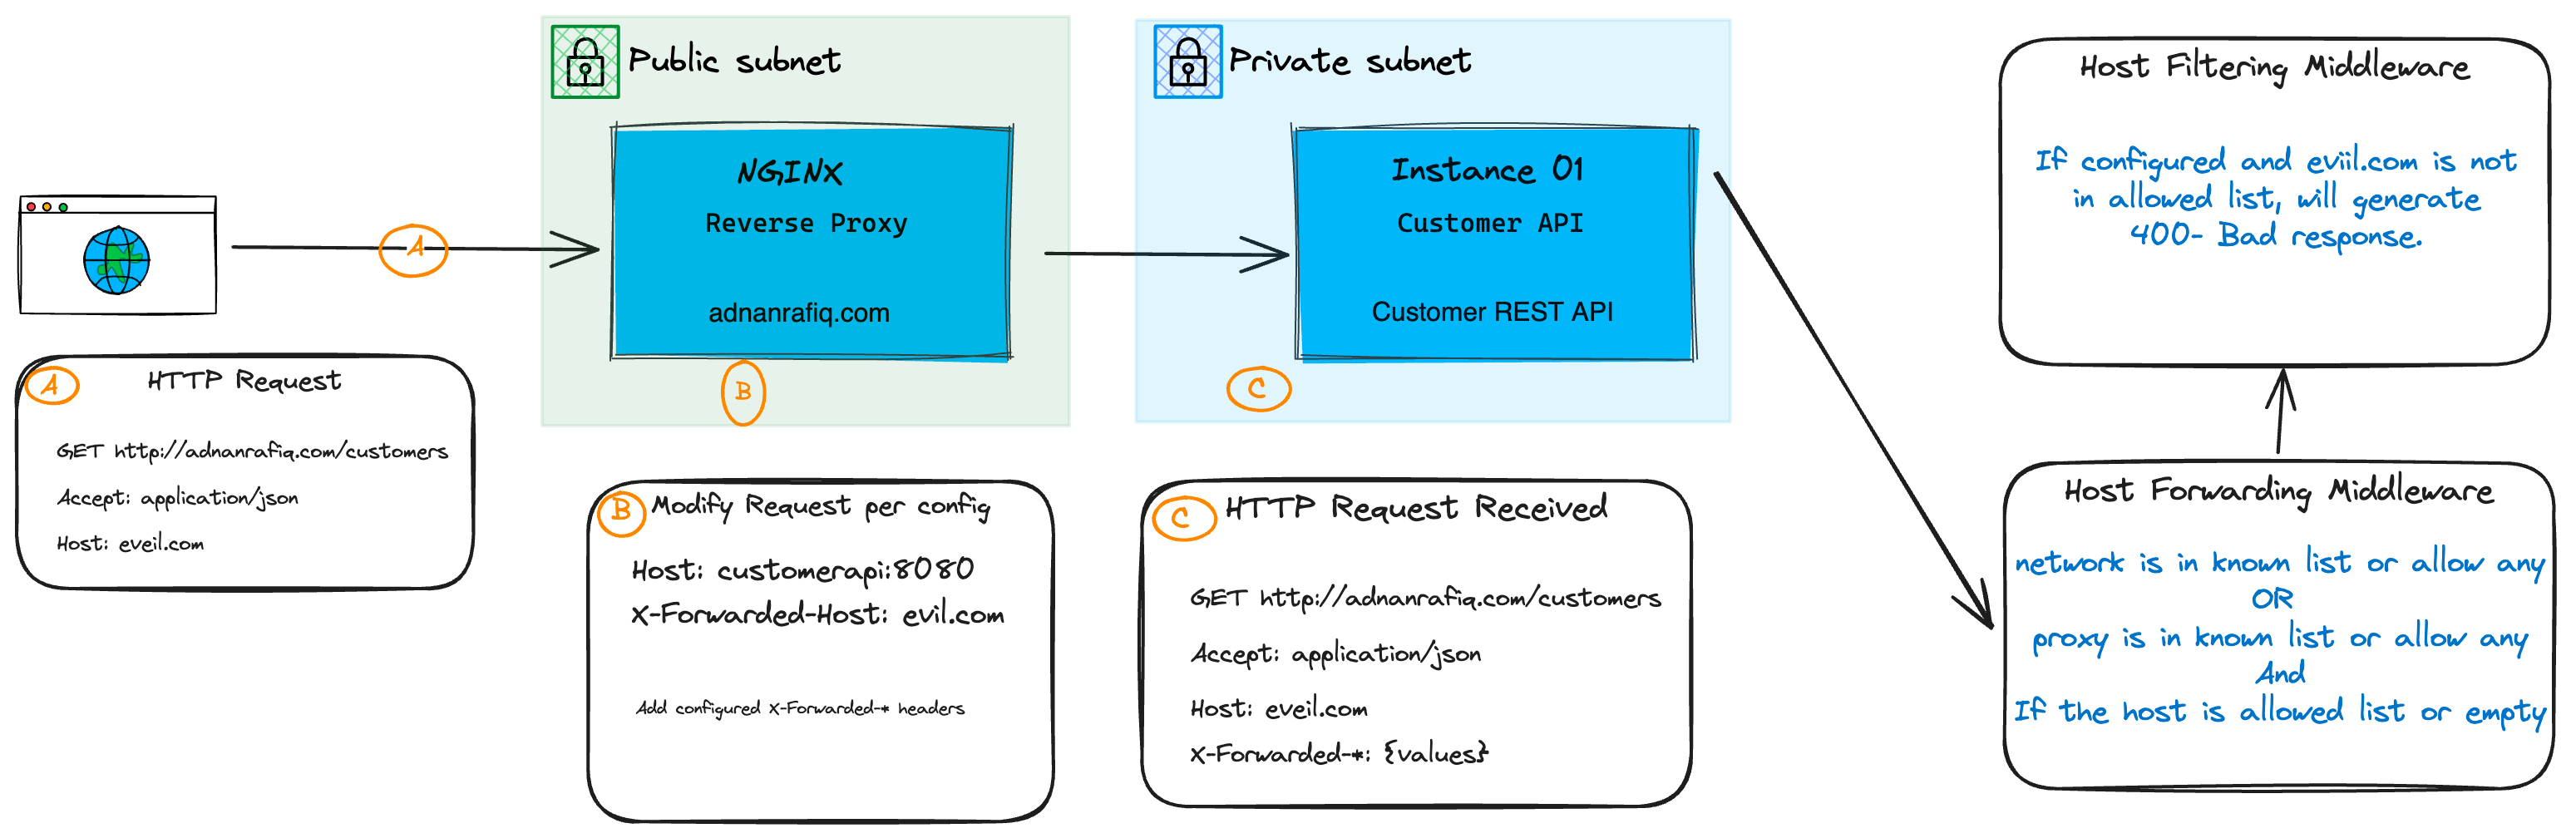 Show the flow of HTTP request from public internet to nginx proxy to .NET Application and the use of Host Filtering and Forwarded Headers Middlewares